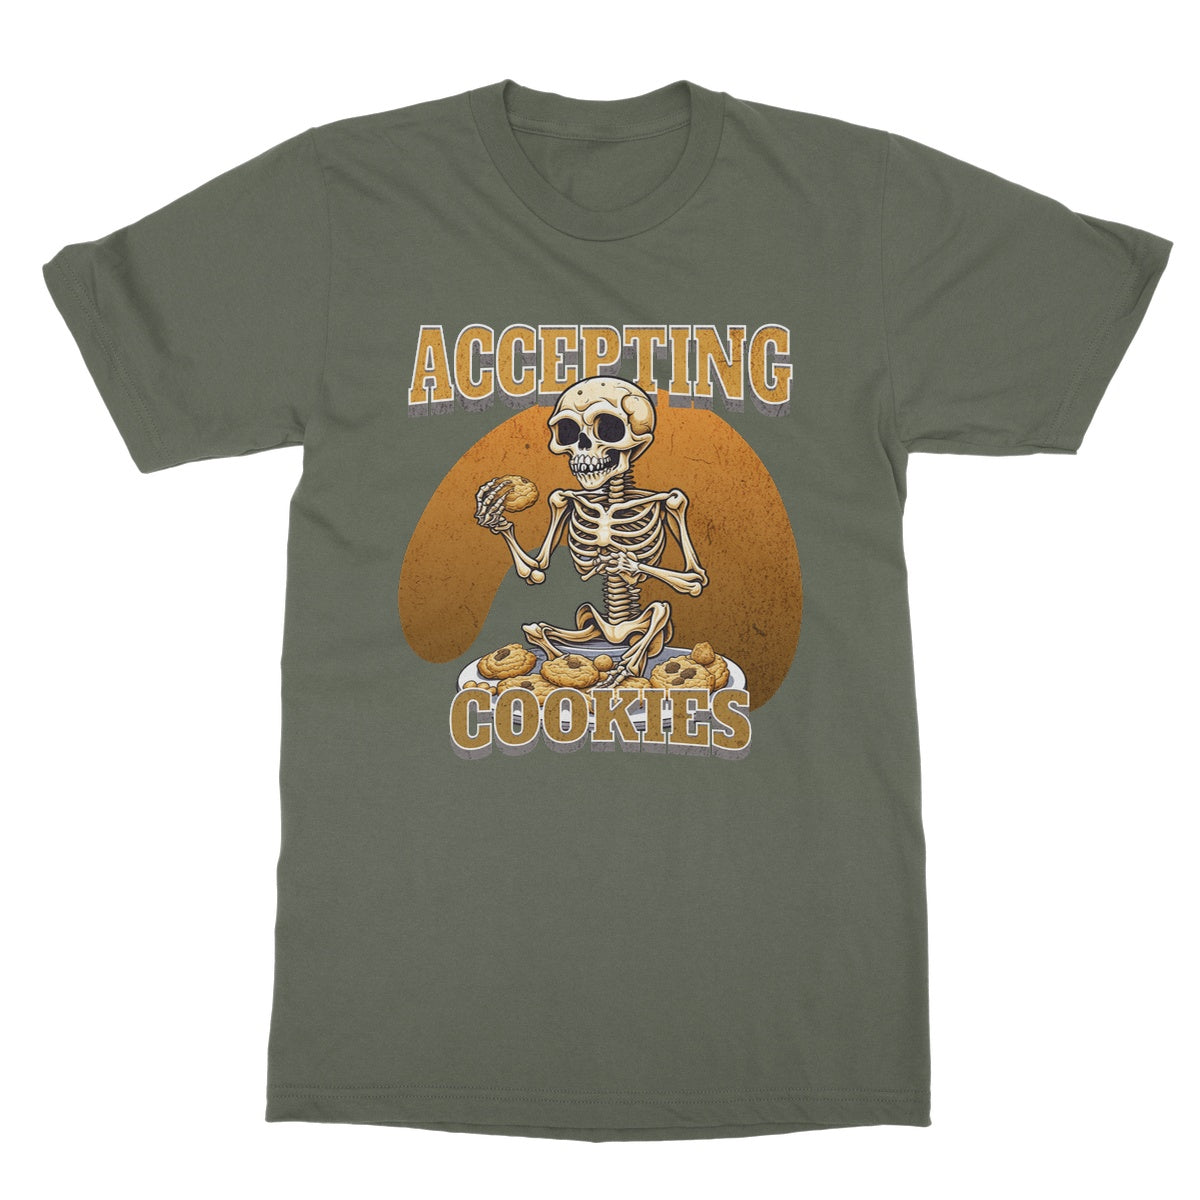 accepting cookies t shirt green